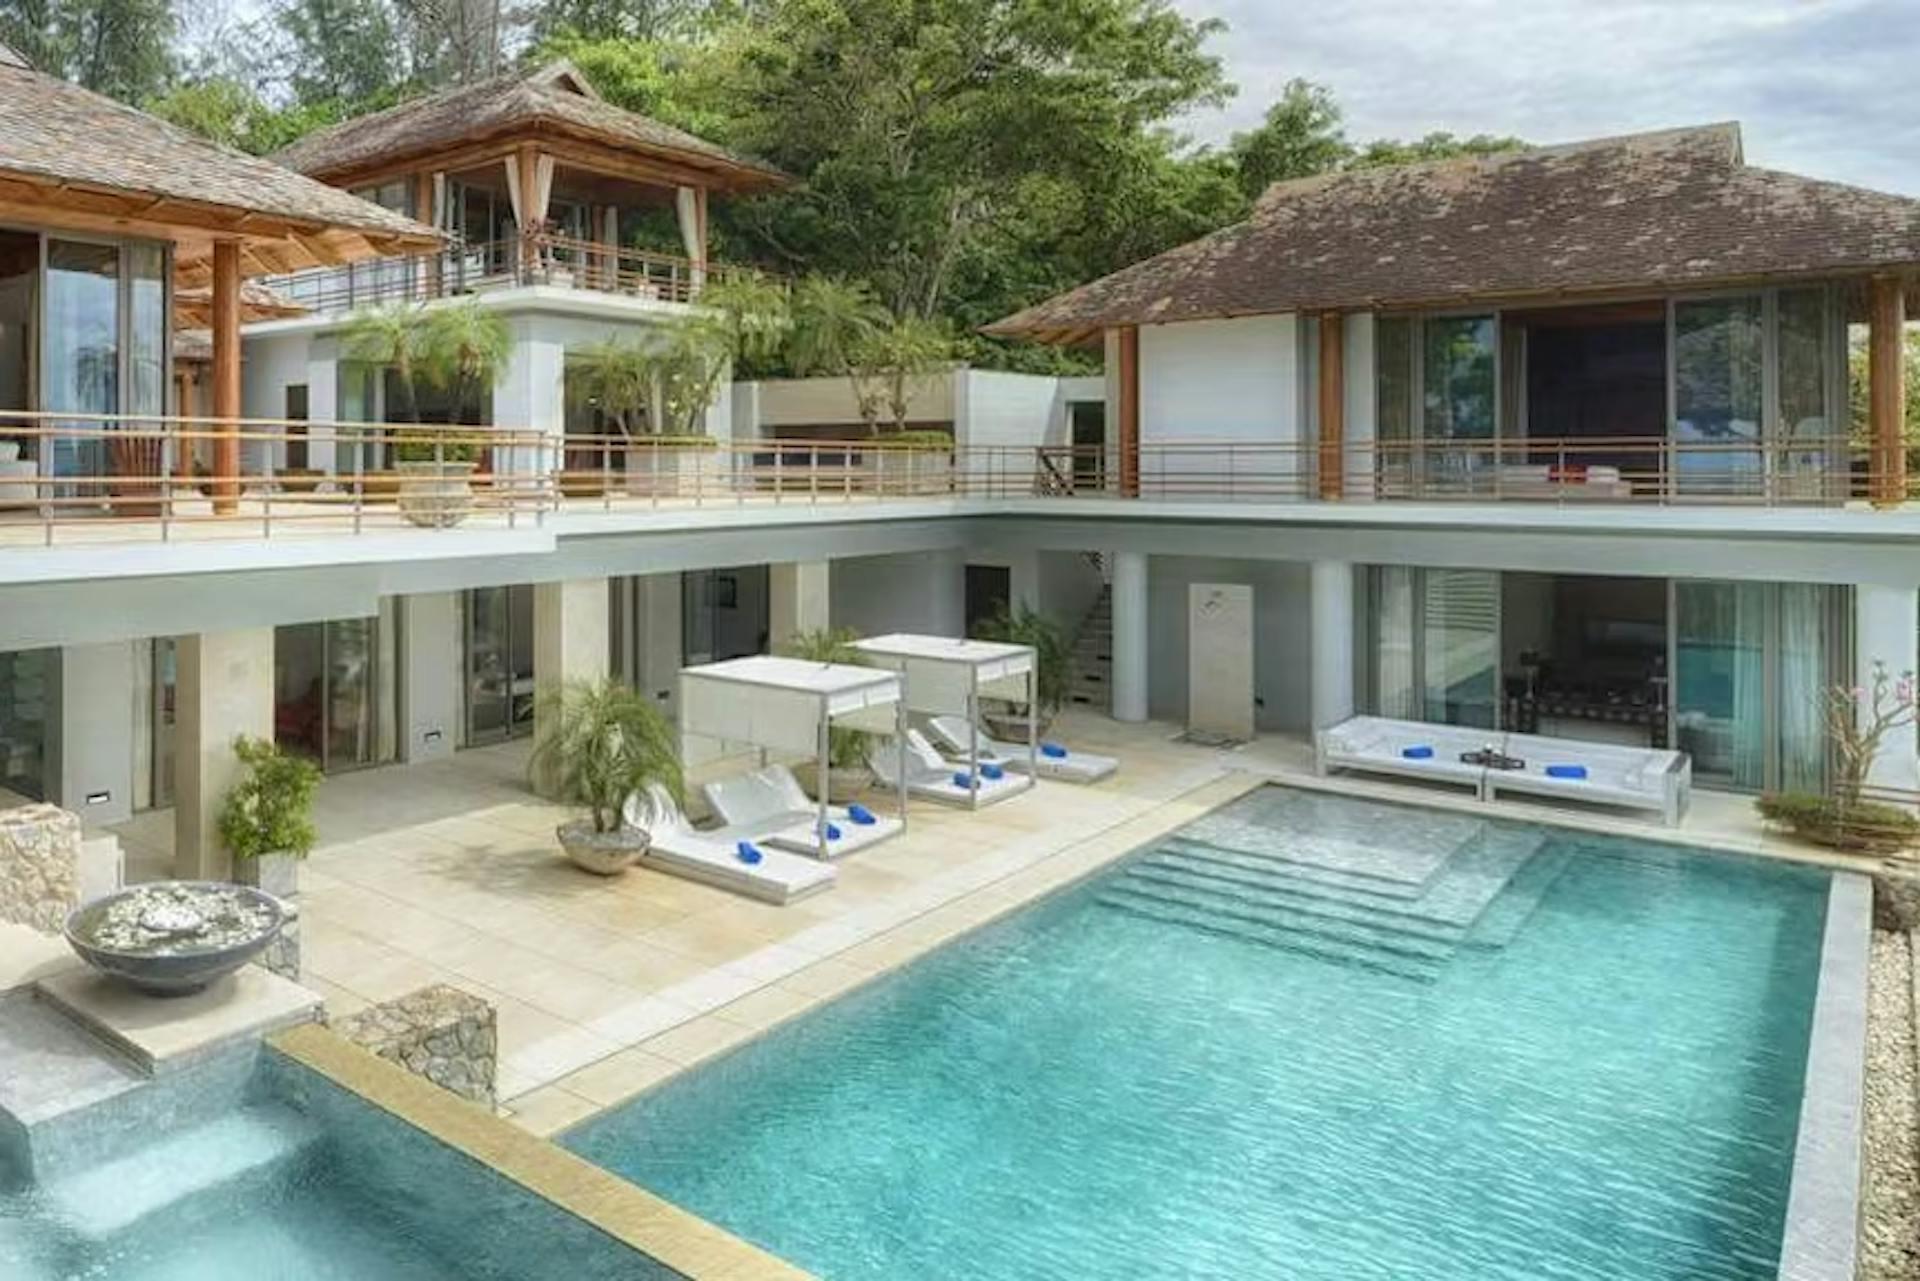 This villa in Phuket, Thailand is one of many properties said to have been owned by Alexandre Cazes.(www.villatorcello.com)